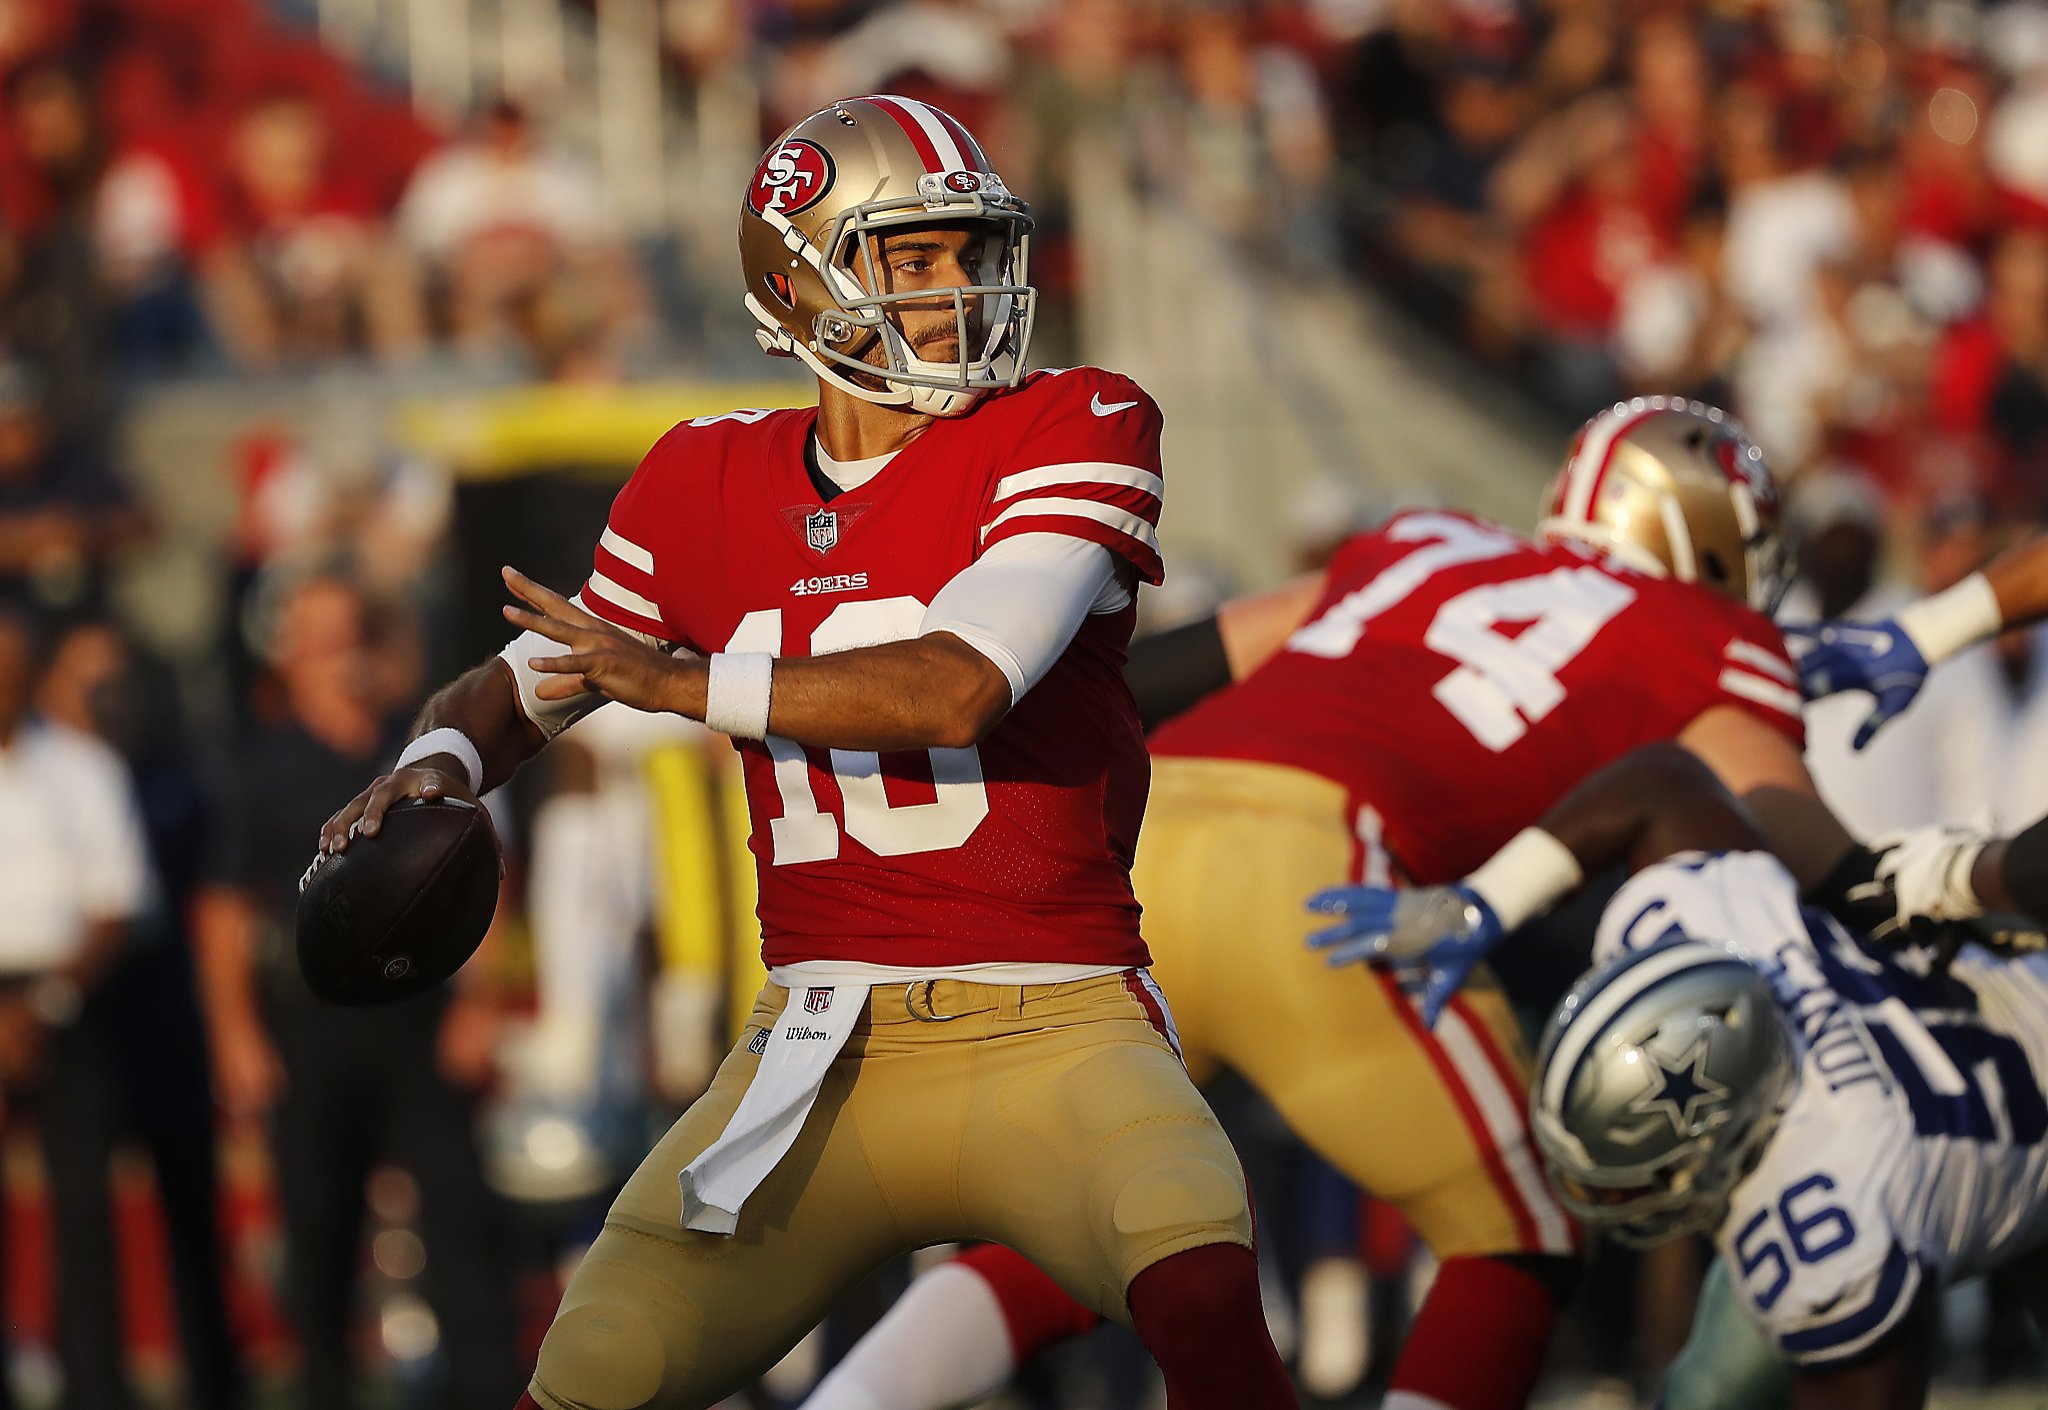 San francisco 49ers page on flashscore.com offers livescore, results, stand...